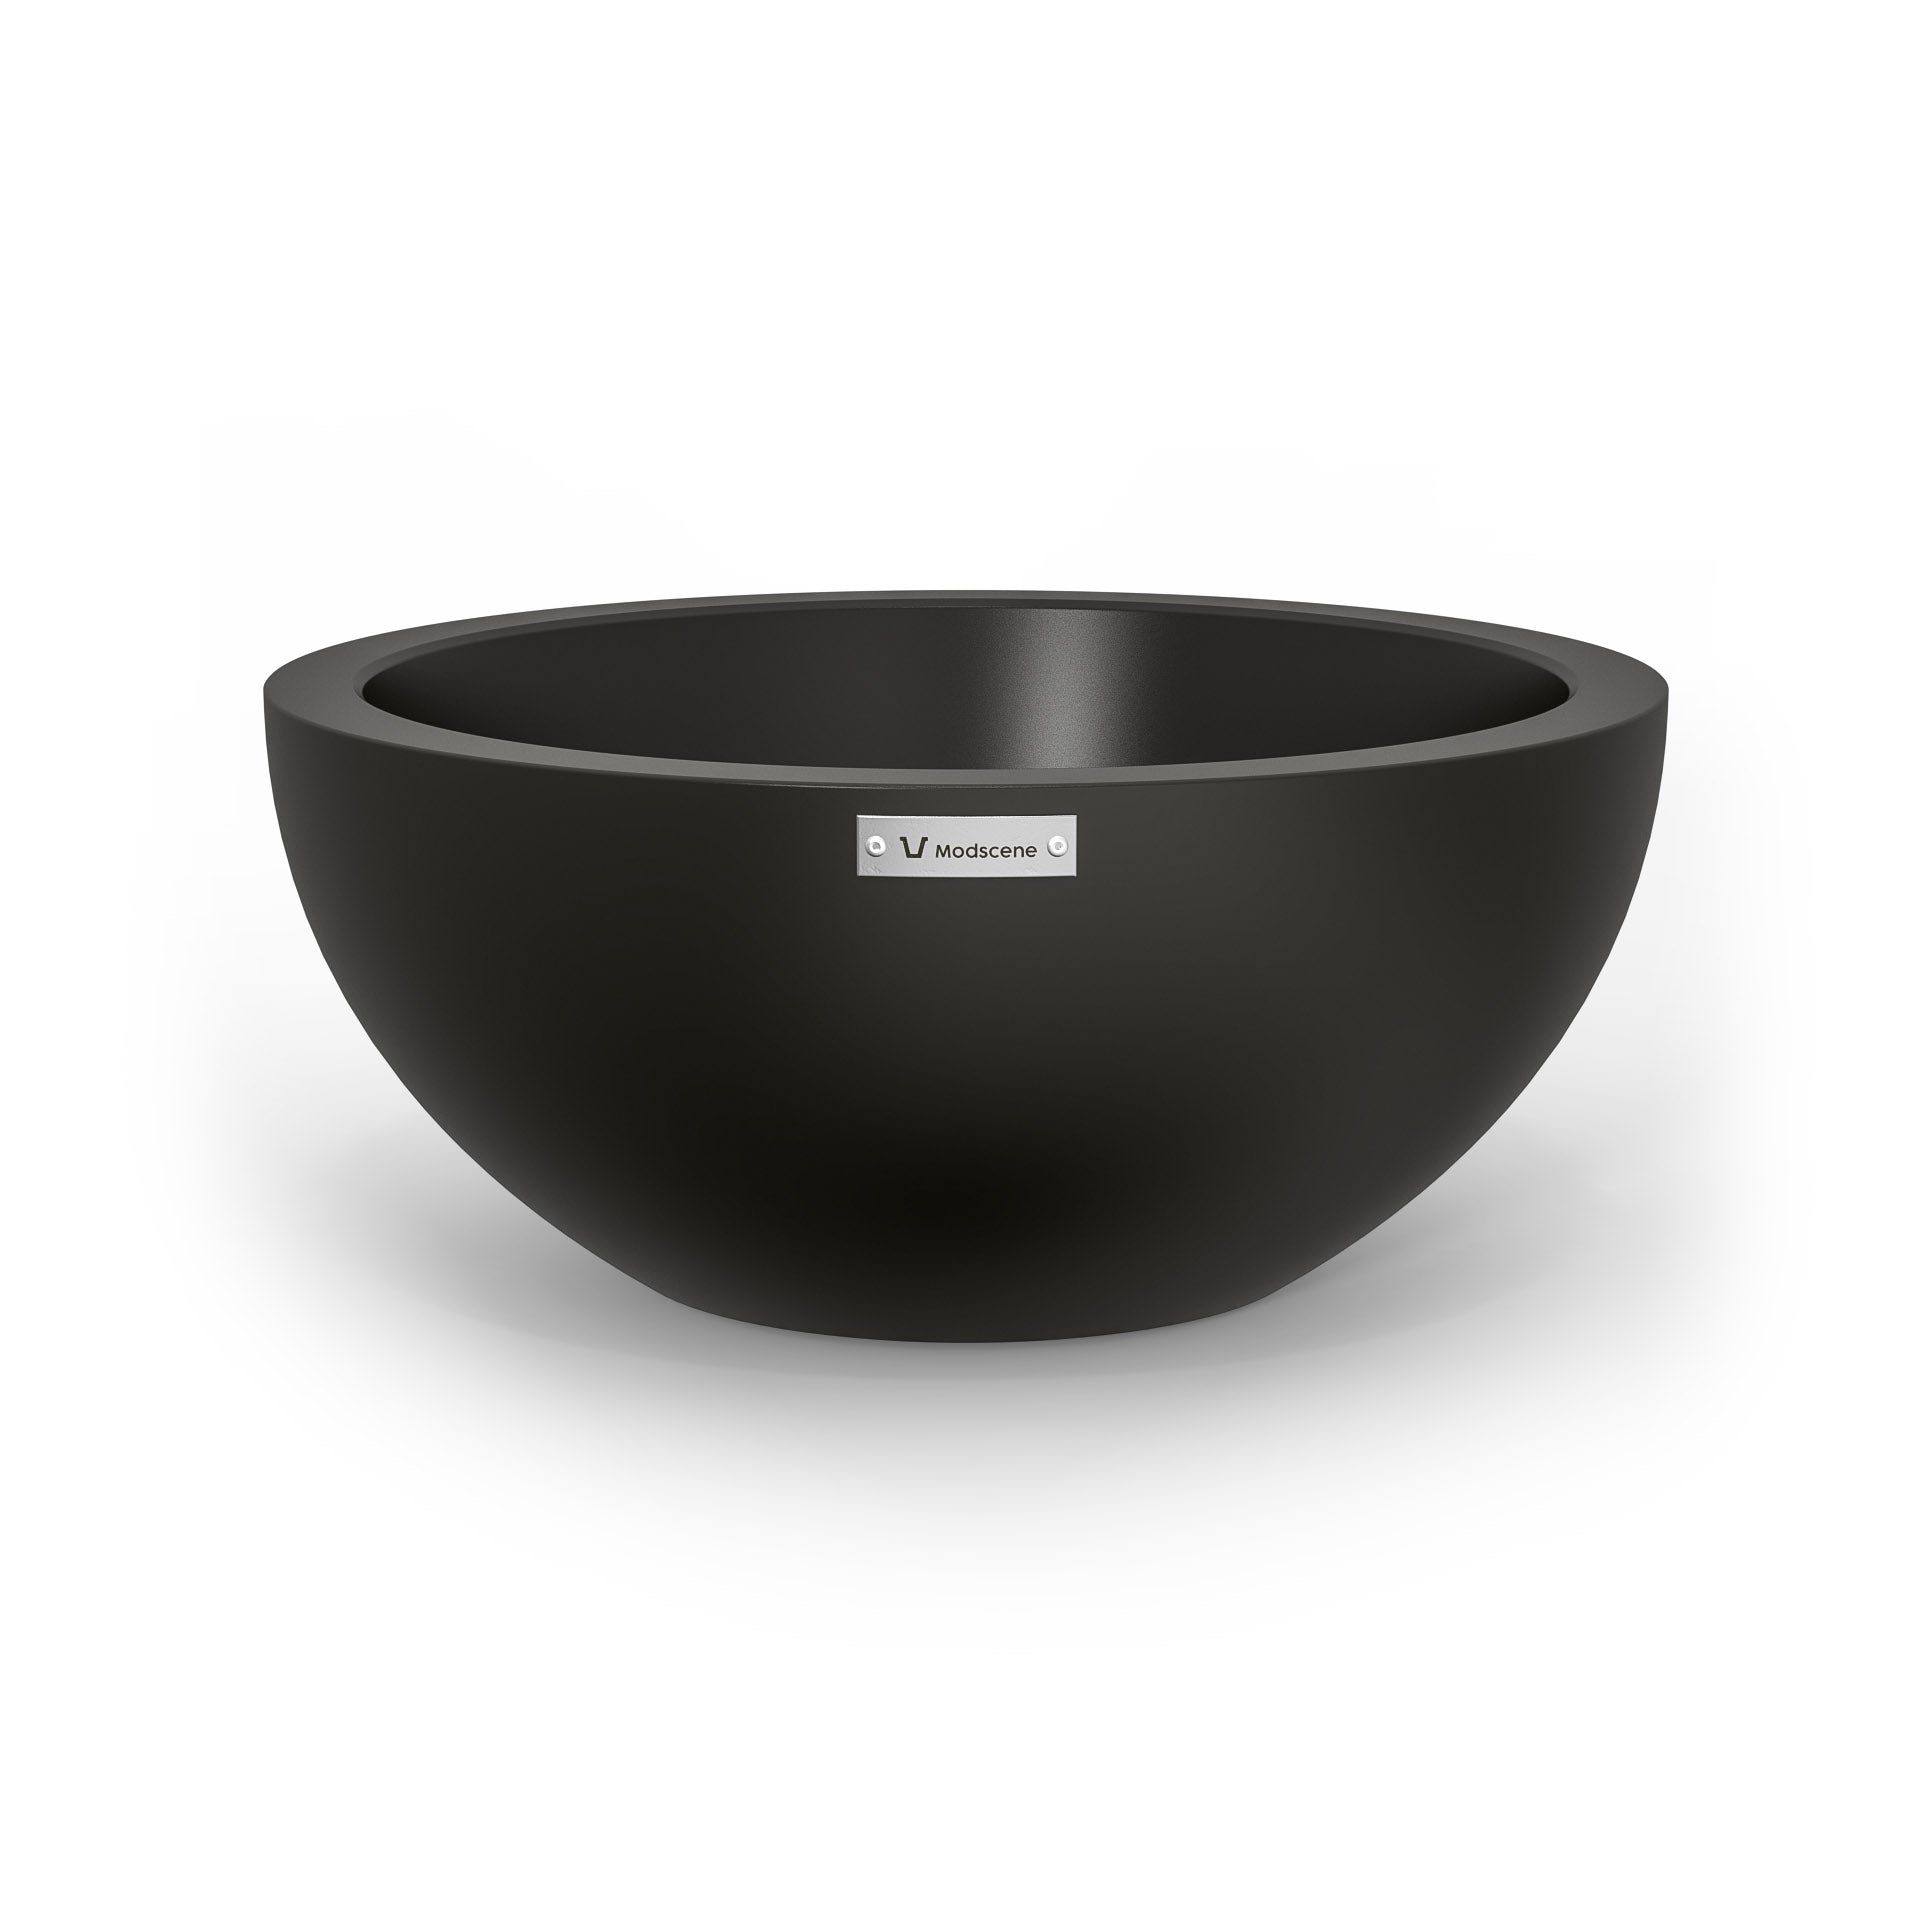 A small Modscene planter bowl in black. NZ made.